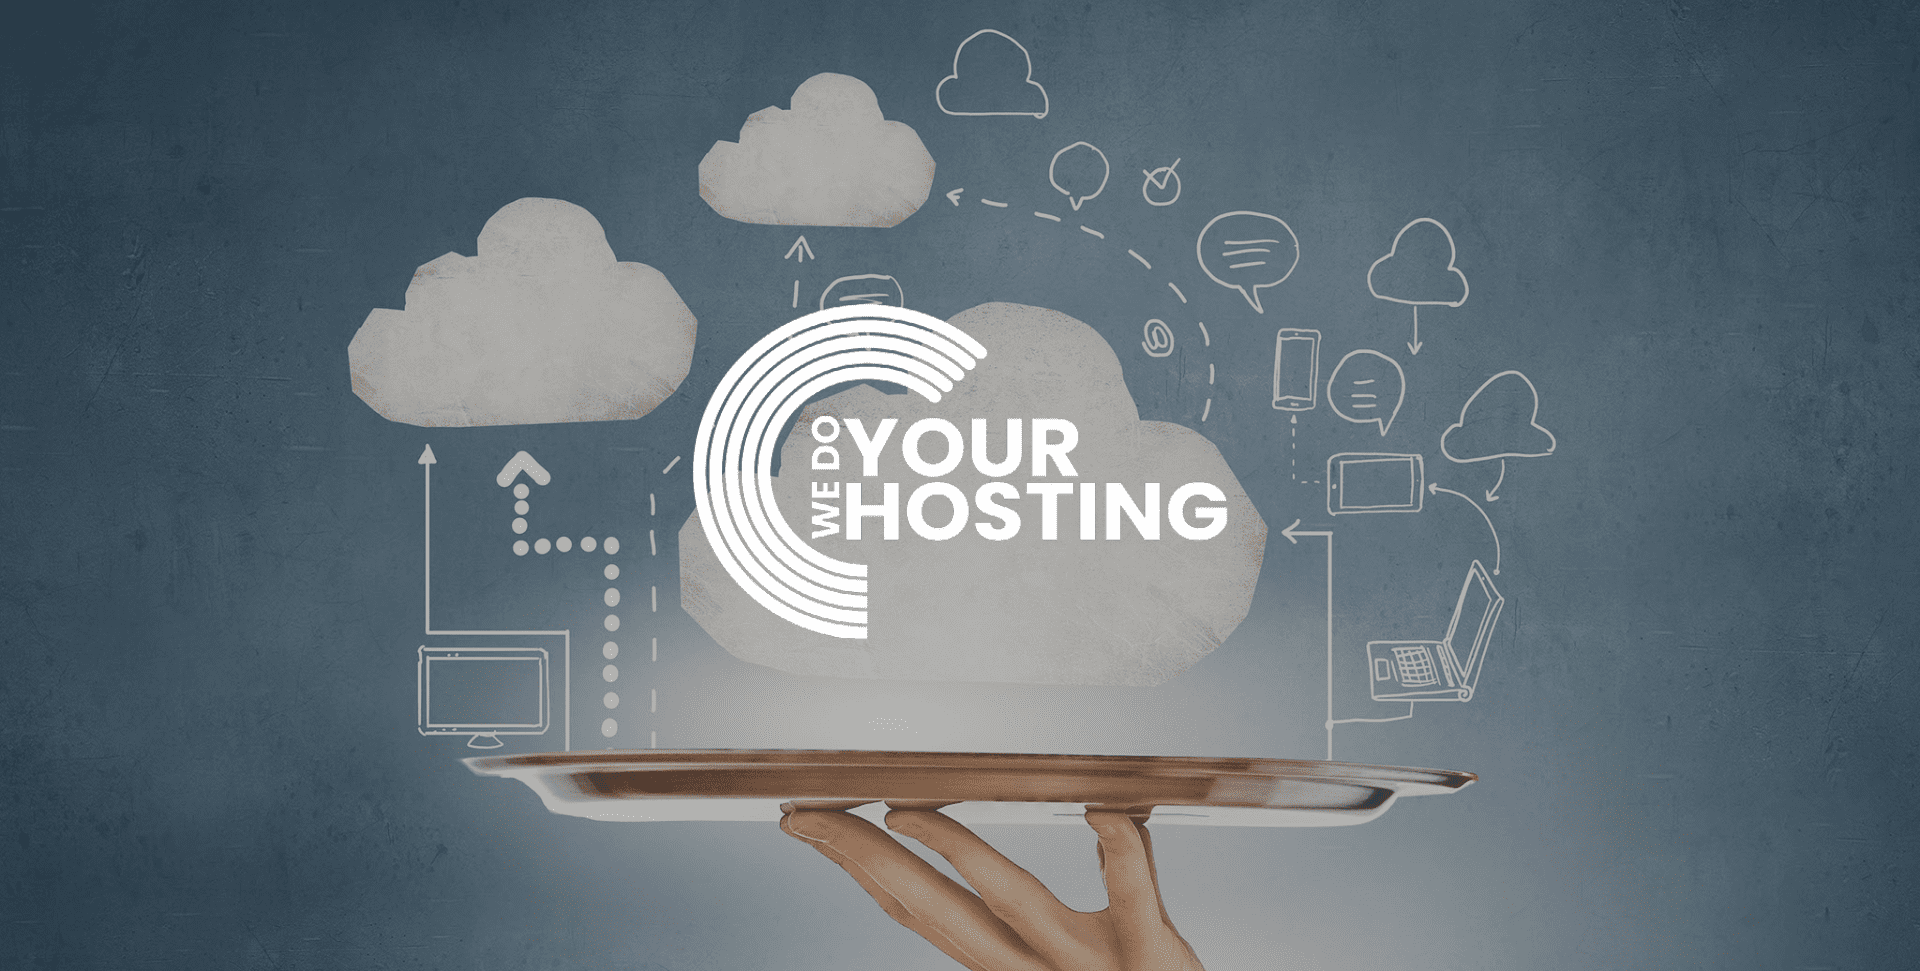 WeDoYourHosting white logo on background of white cloud hovering over tray with icons surrounding it